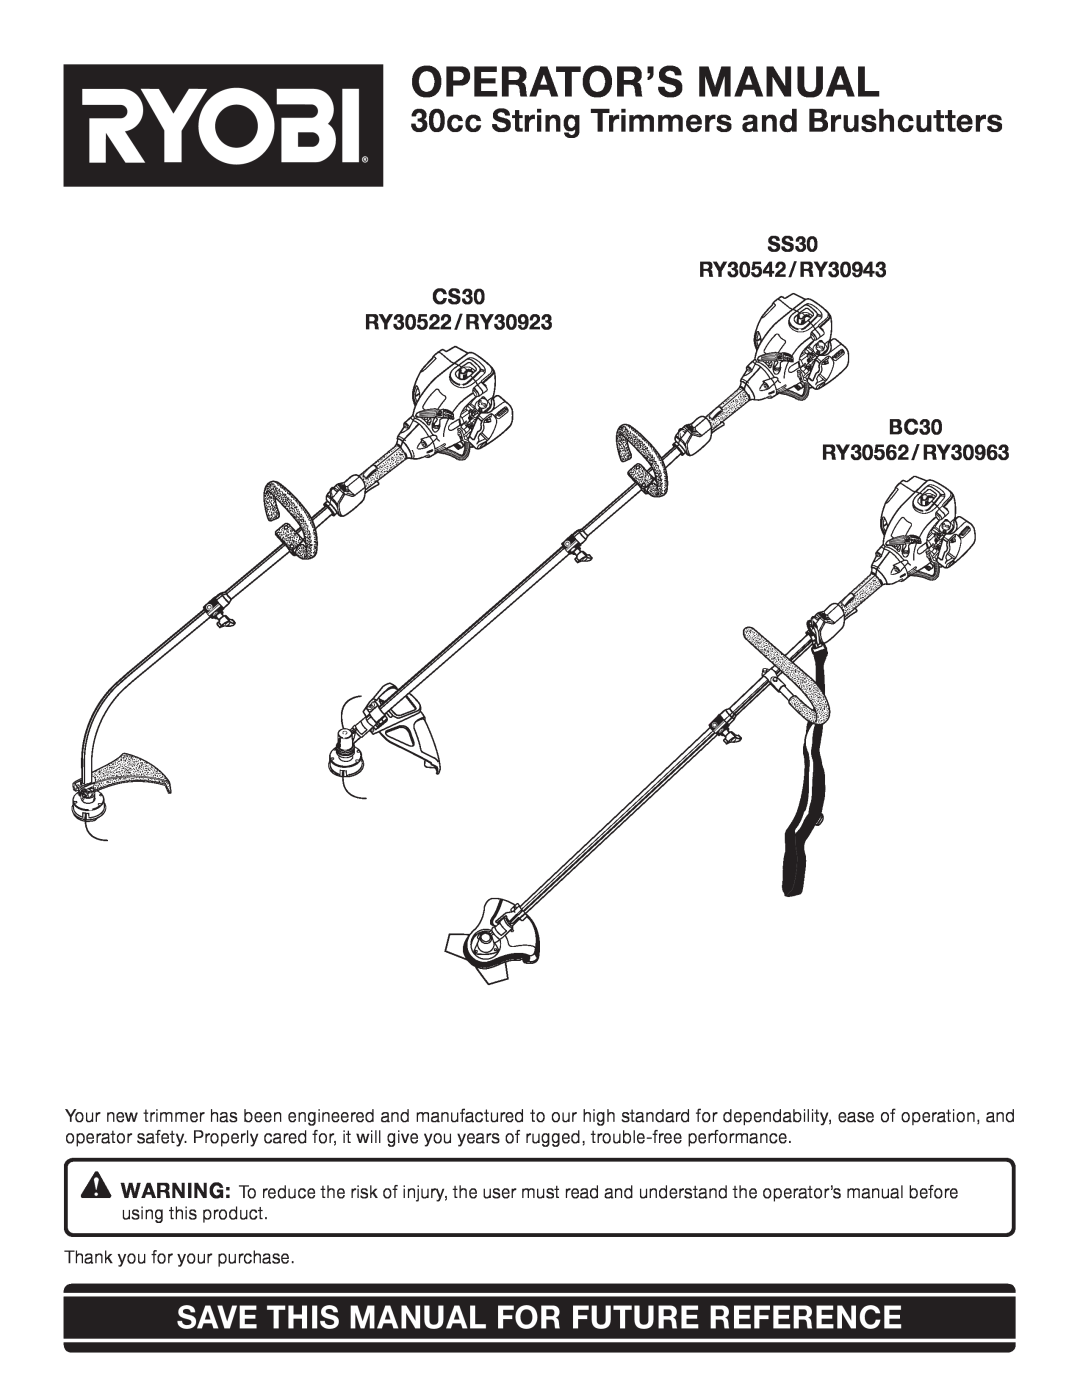 Ryobi RY30923 manual Operator’S Manual, 30cc String Trimmers and Brushcutters, Save This Manual For Future Reference 